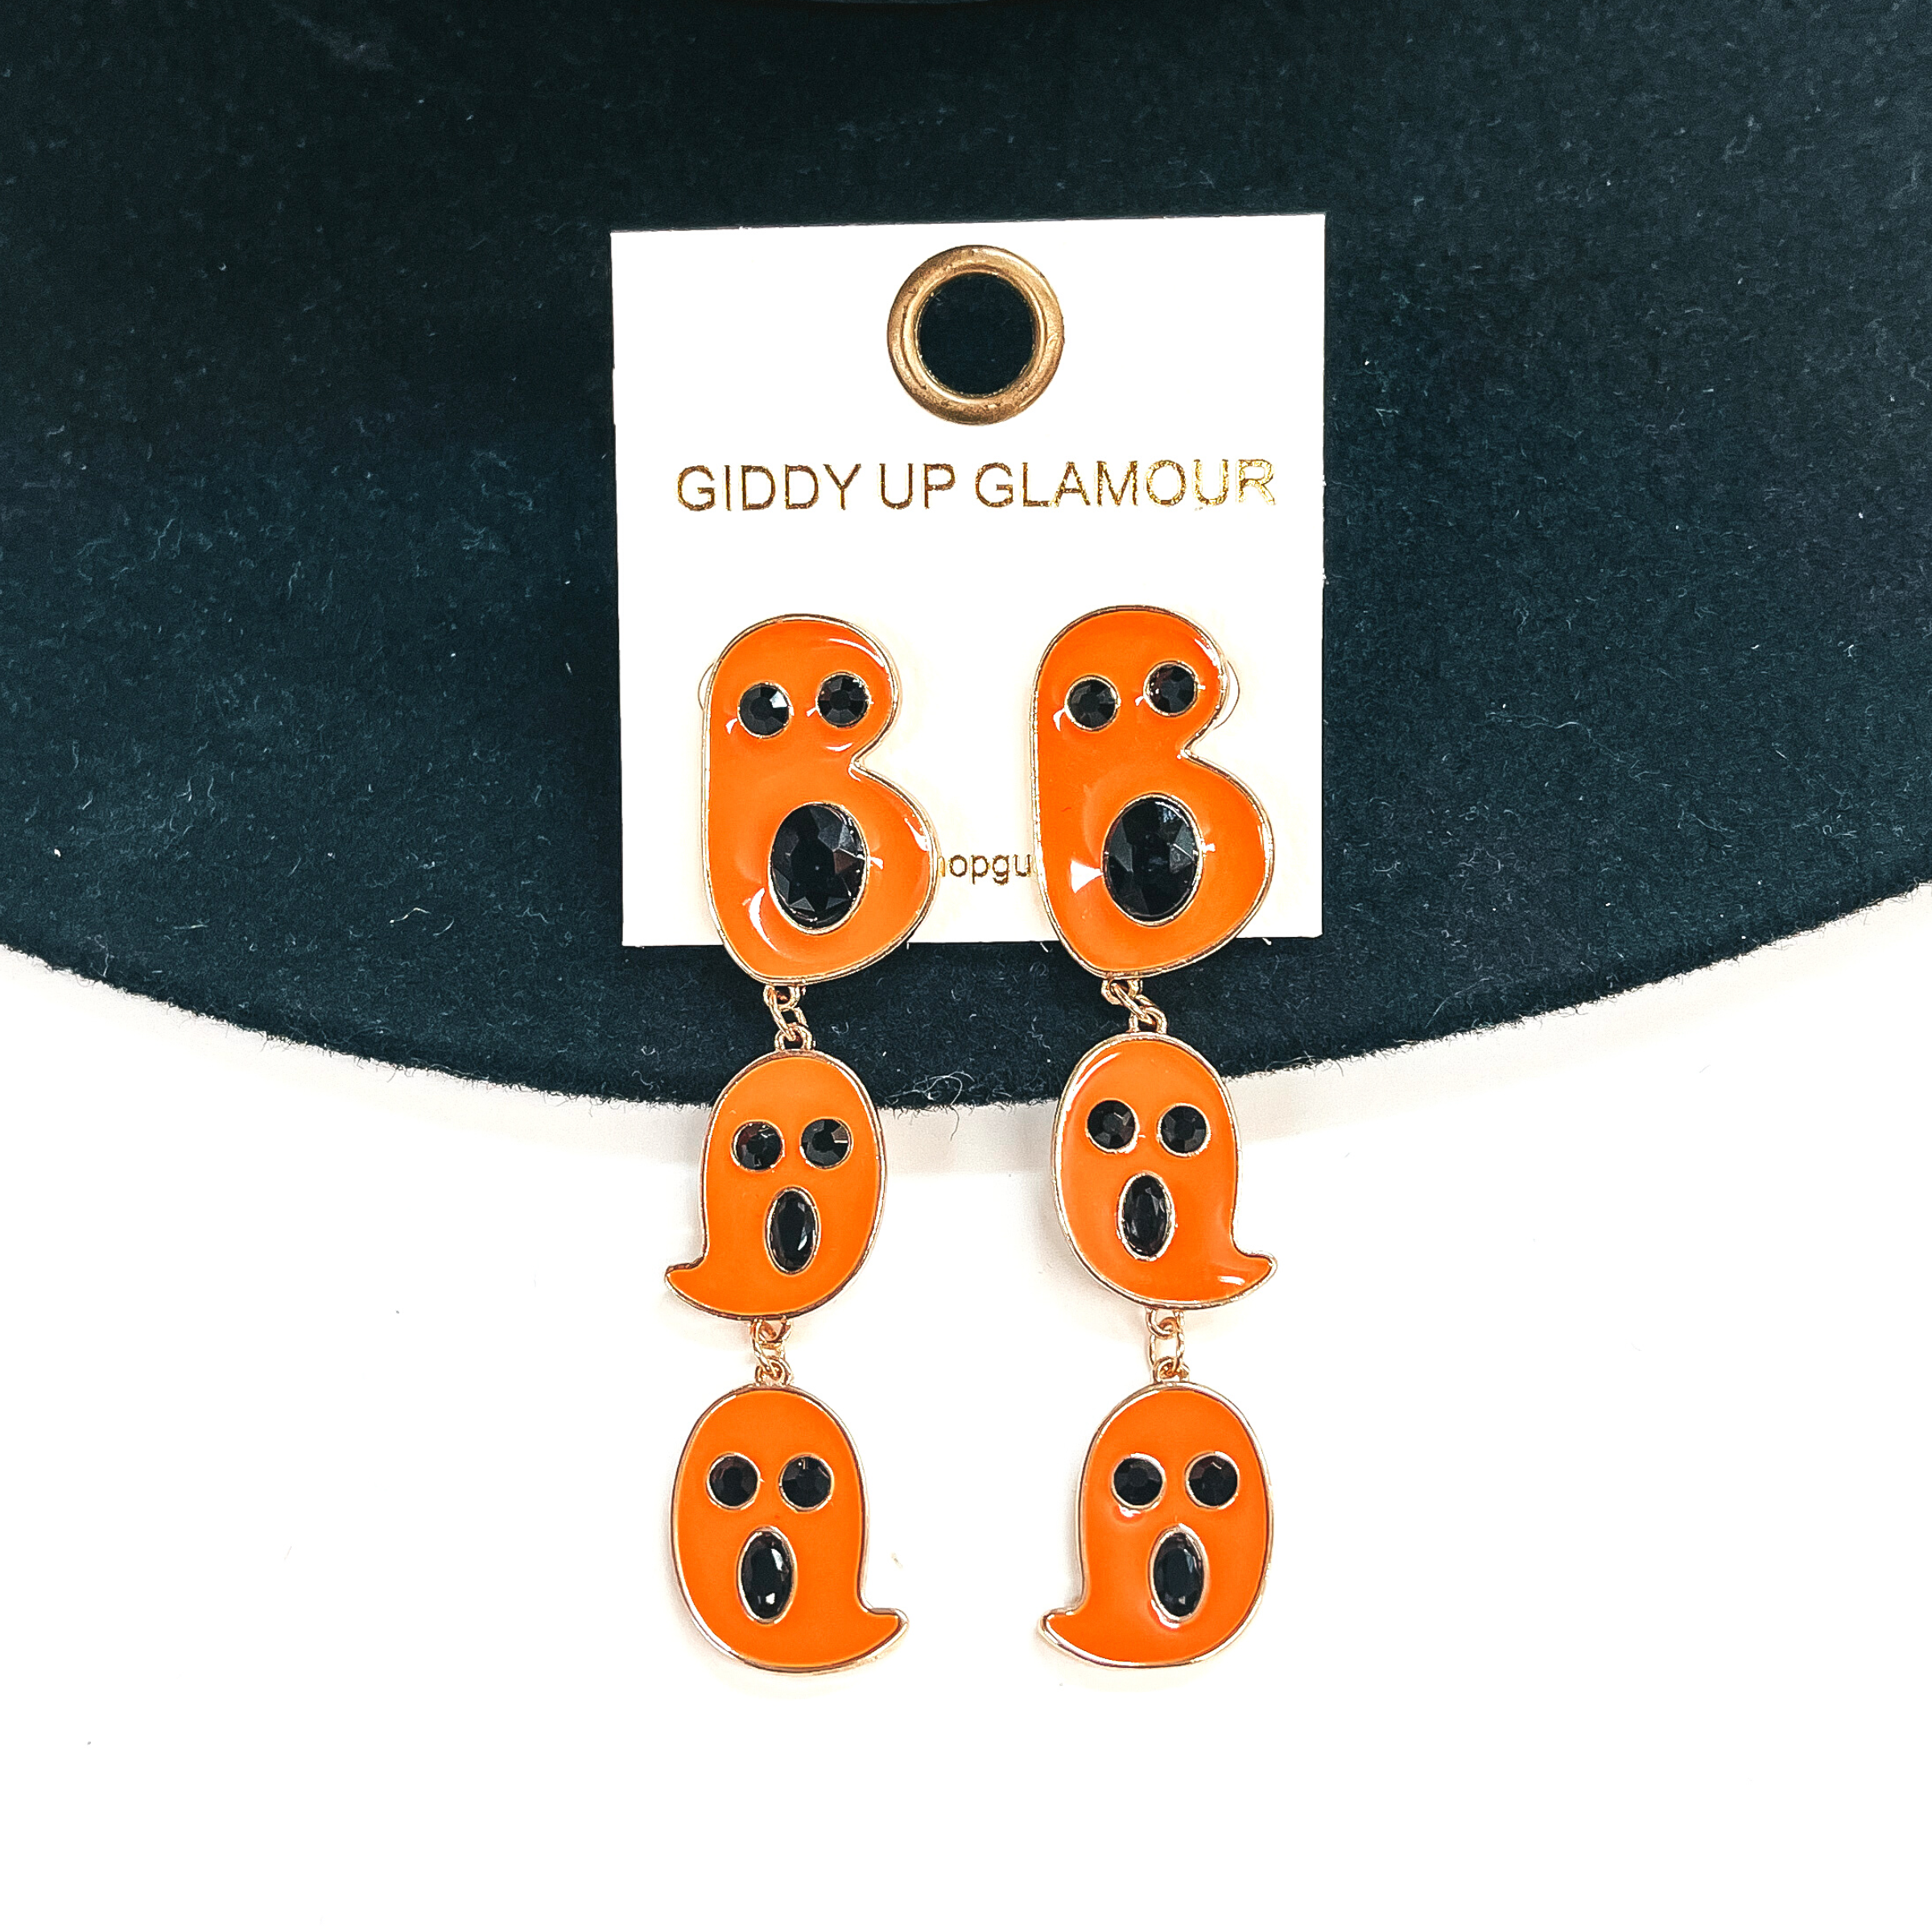 These are ghost shaped tiered drop earrings that spell out, Boo. They are in a gold setting and have black crystals as eyes and mouth, these are orange.  These earrings are taken on a black felt hat brim and on a white background.